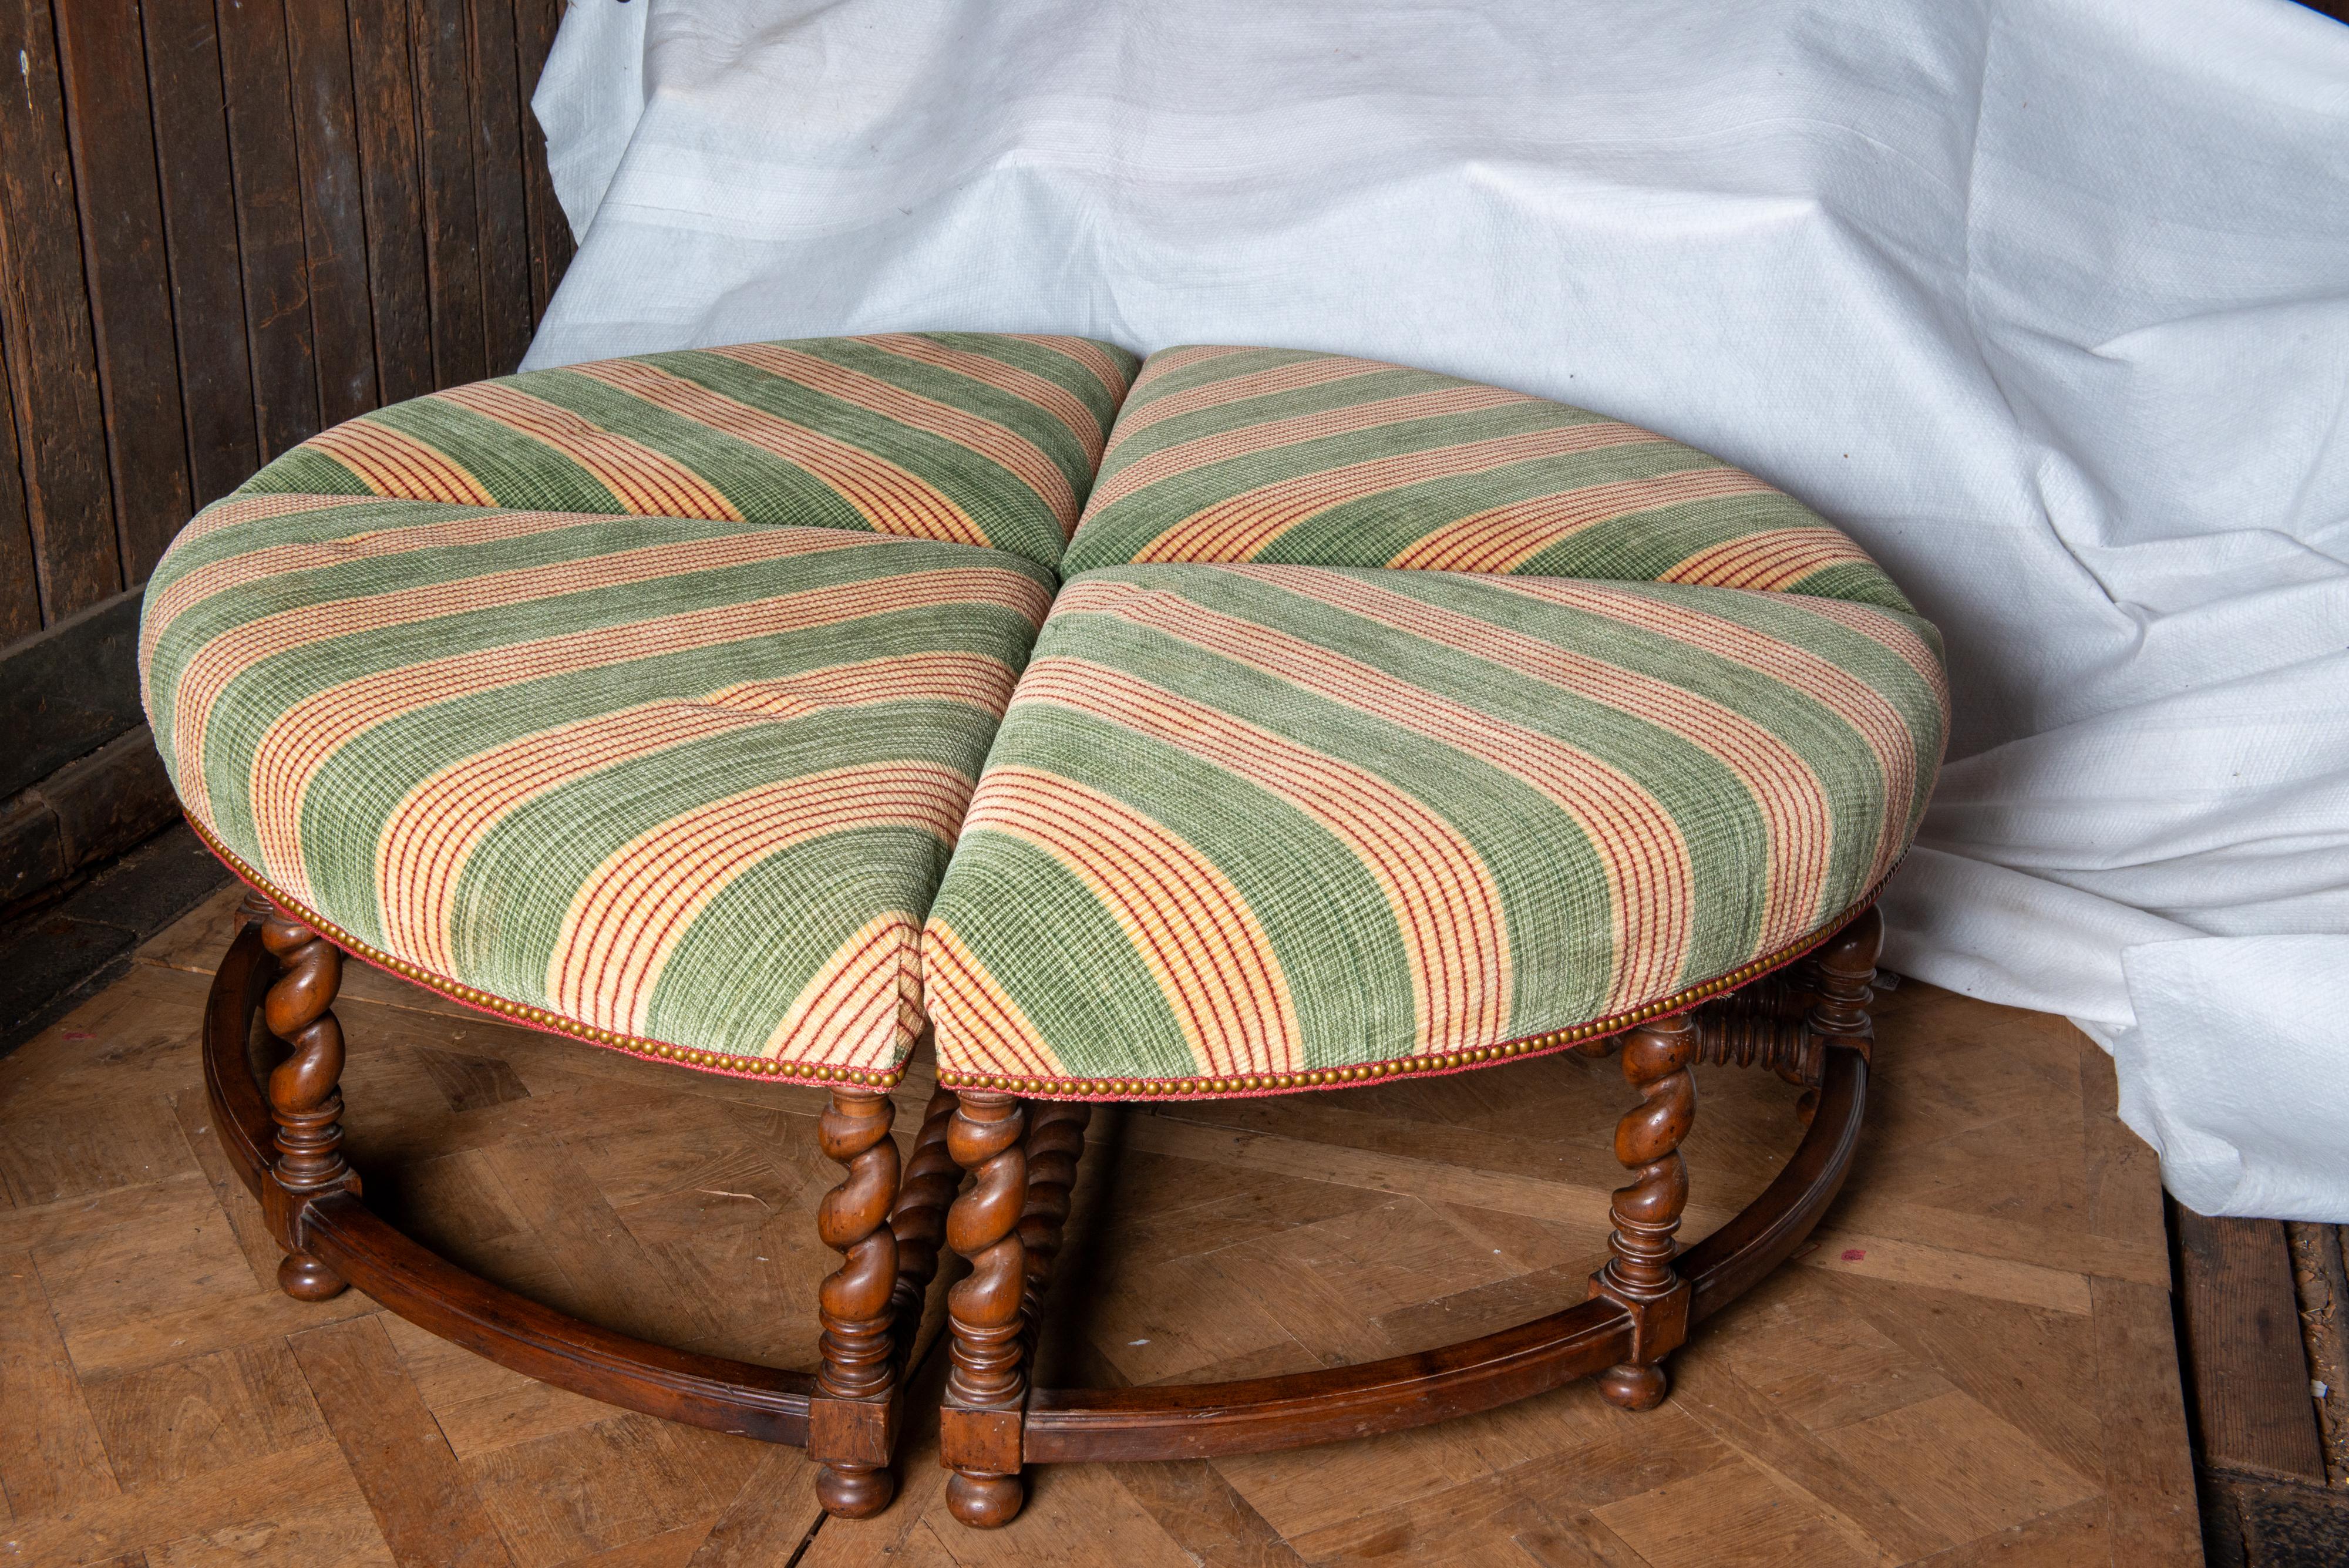 An unusual large four piece round ottoman, bench, or bourne. Each piece is pie shaped and upholstered in a smart green and red striped substantial fabric. The wood base has carved barley twist leg ending in bun feet. The front stretchers are curved.